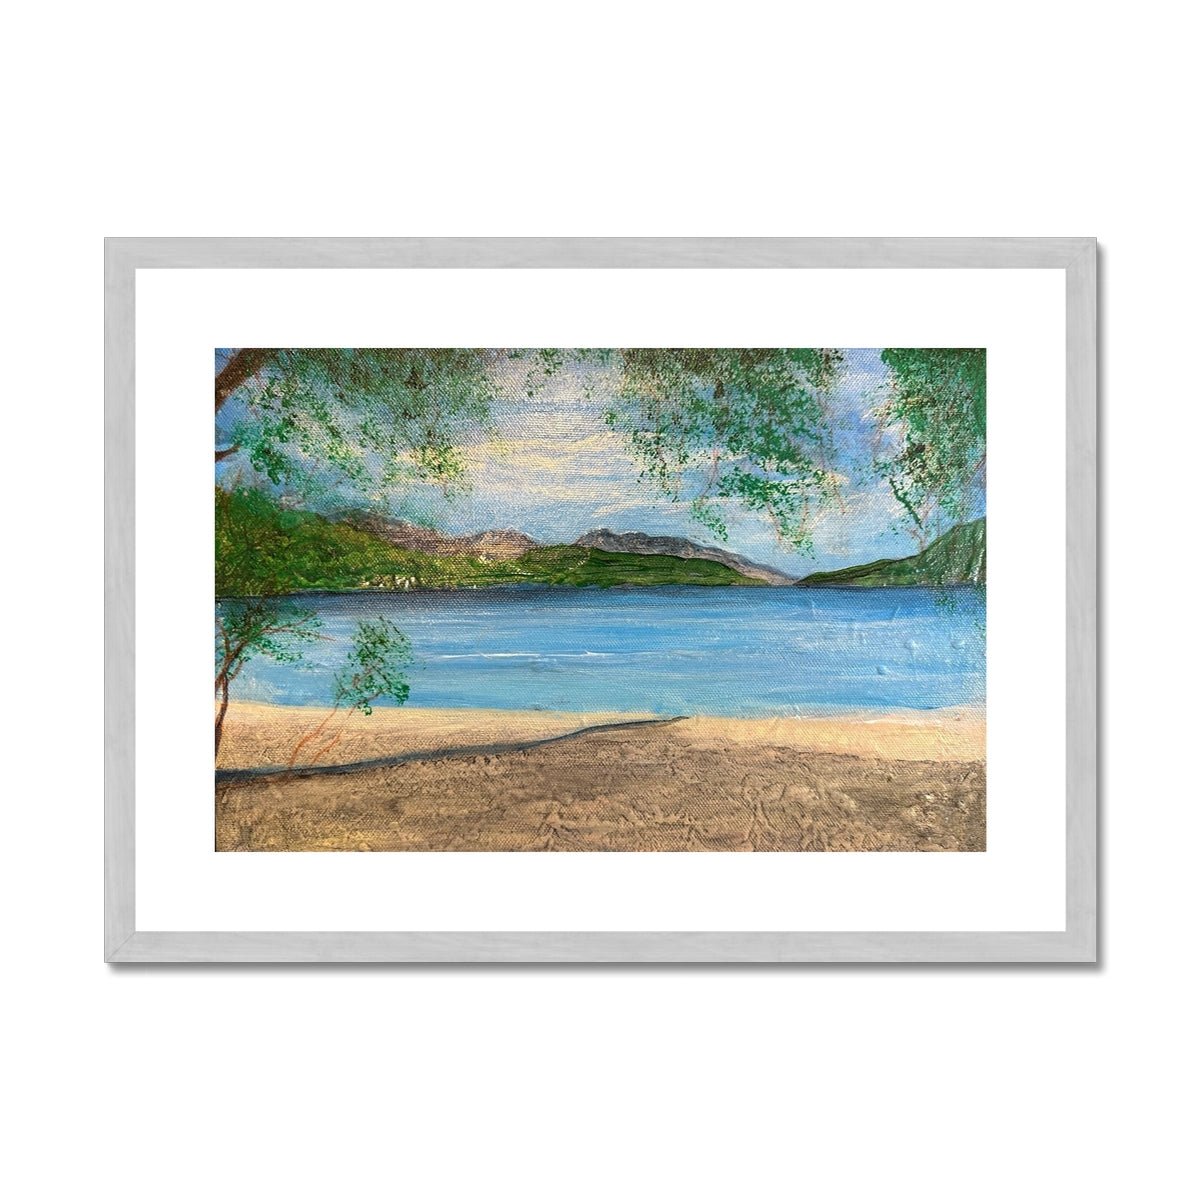 Firkin Point Loch Lomond Painting | Antique Framed & Mounted Prints From Scotland-Antique Framed & Mounted Prints-Scottish Lochs & Mountains Art Gallery-A2 Landscape-Silver Frame-Paintings, Prints, Homeware, Art Gifts From Scotland By Scottish Artist Kevin Hunter